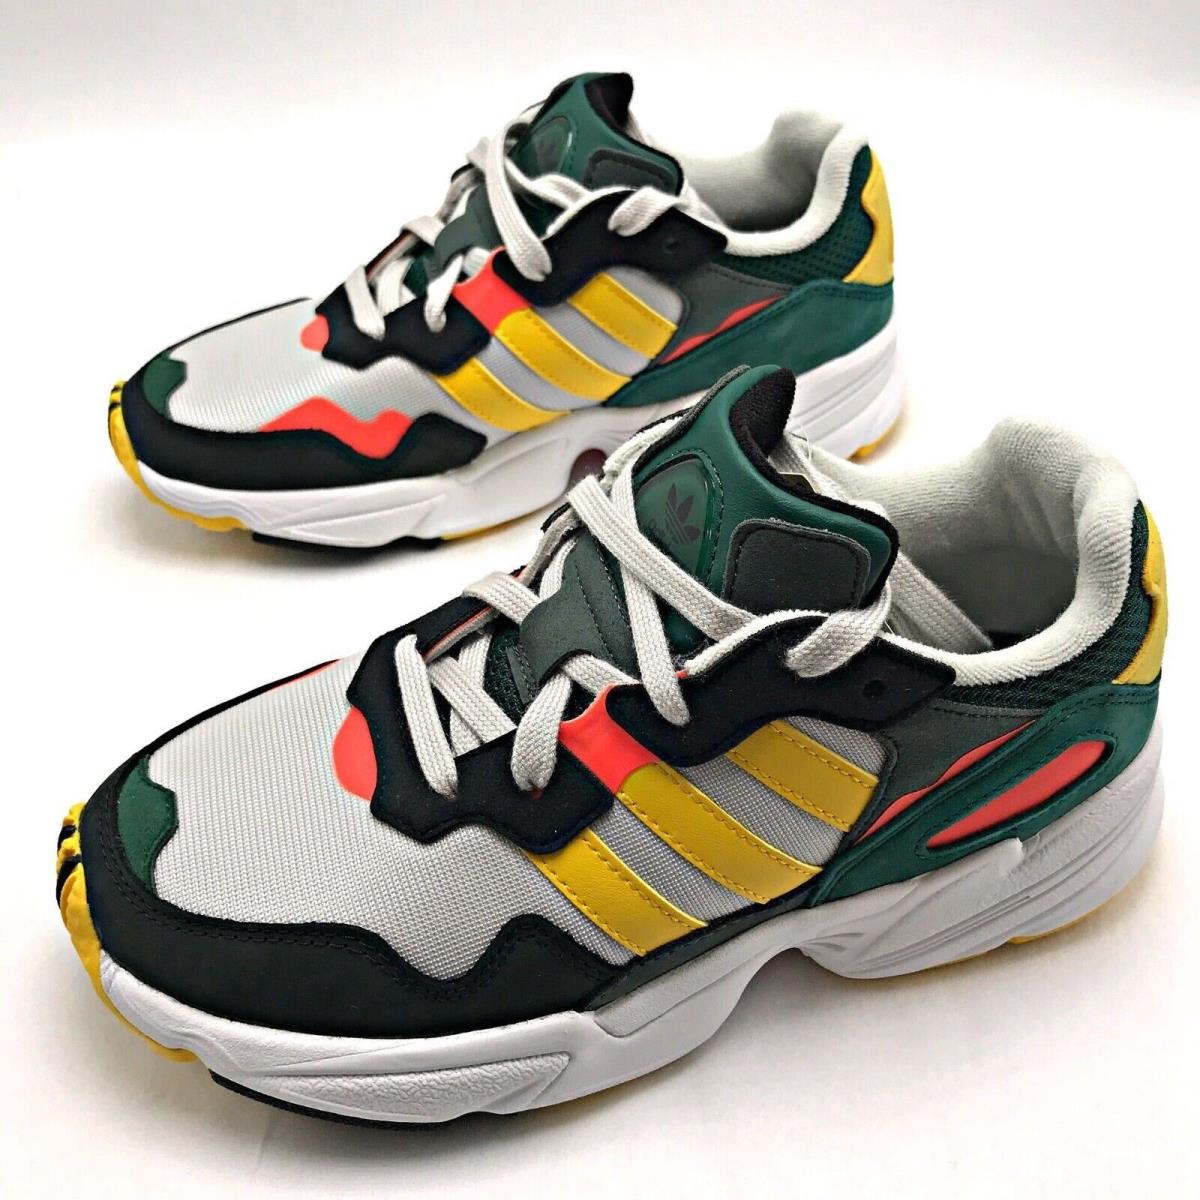 donor edible Instrument Adidas Yung-96 Grey One Bold Gold DB2605 Men`s Shoes sz 5-11 | 692740105154  - Adidas shoes - GREY ONE/BOLD GOLD/SOLAR RED | SporTipTop